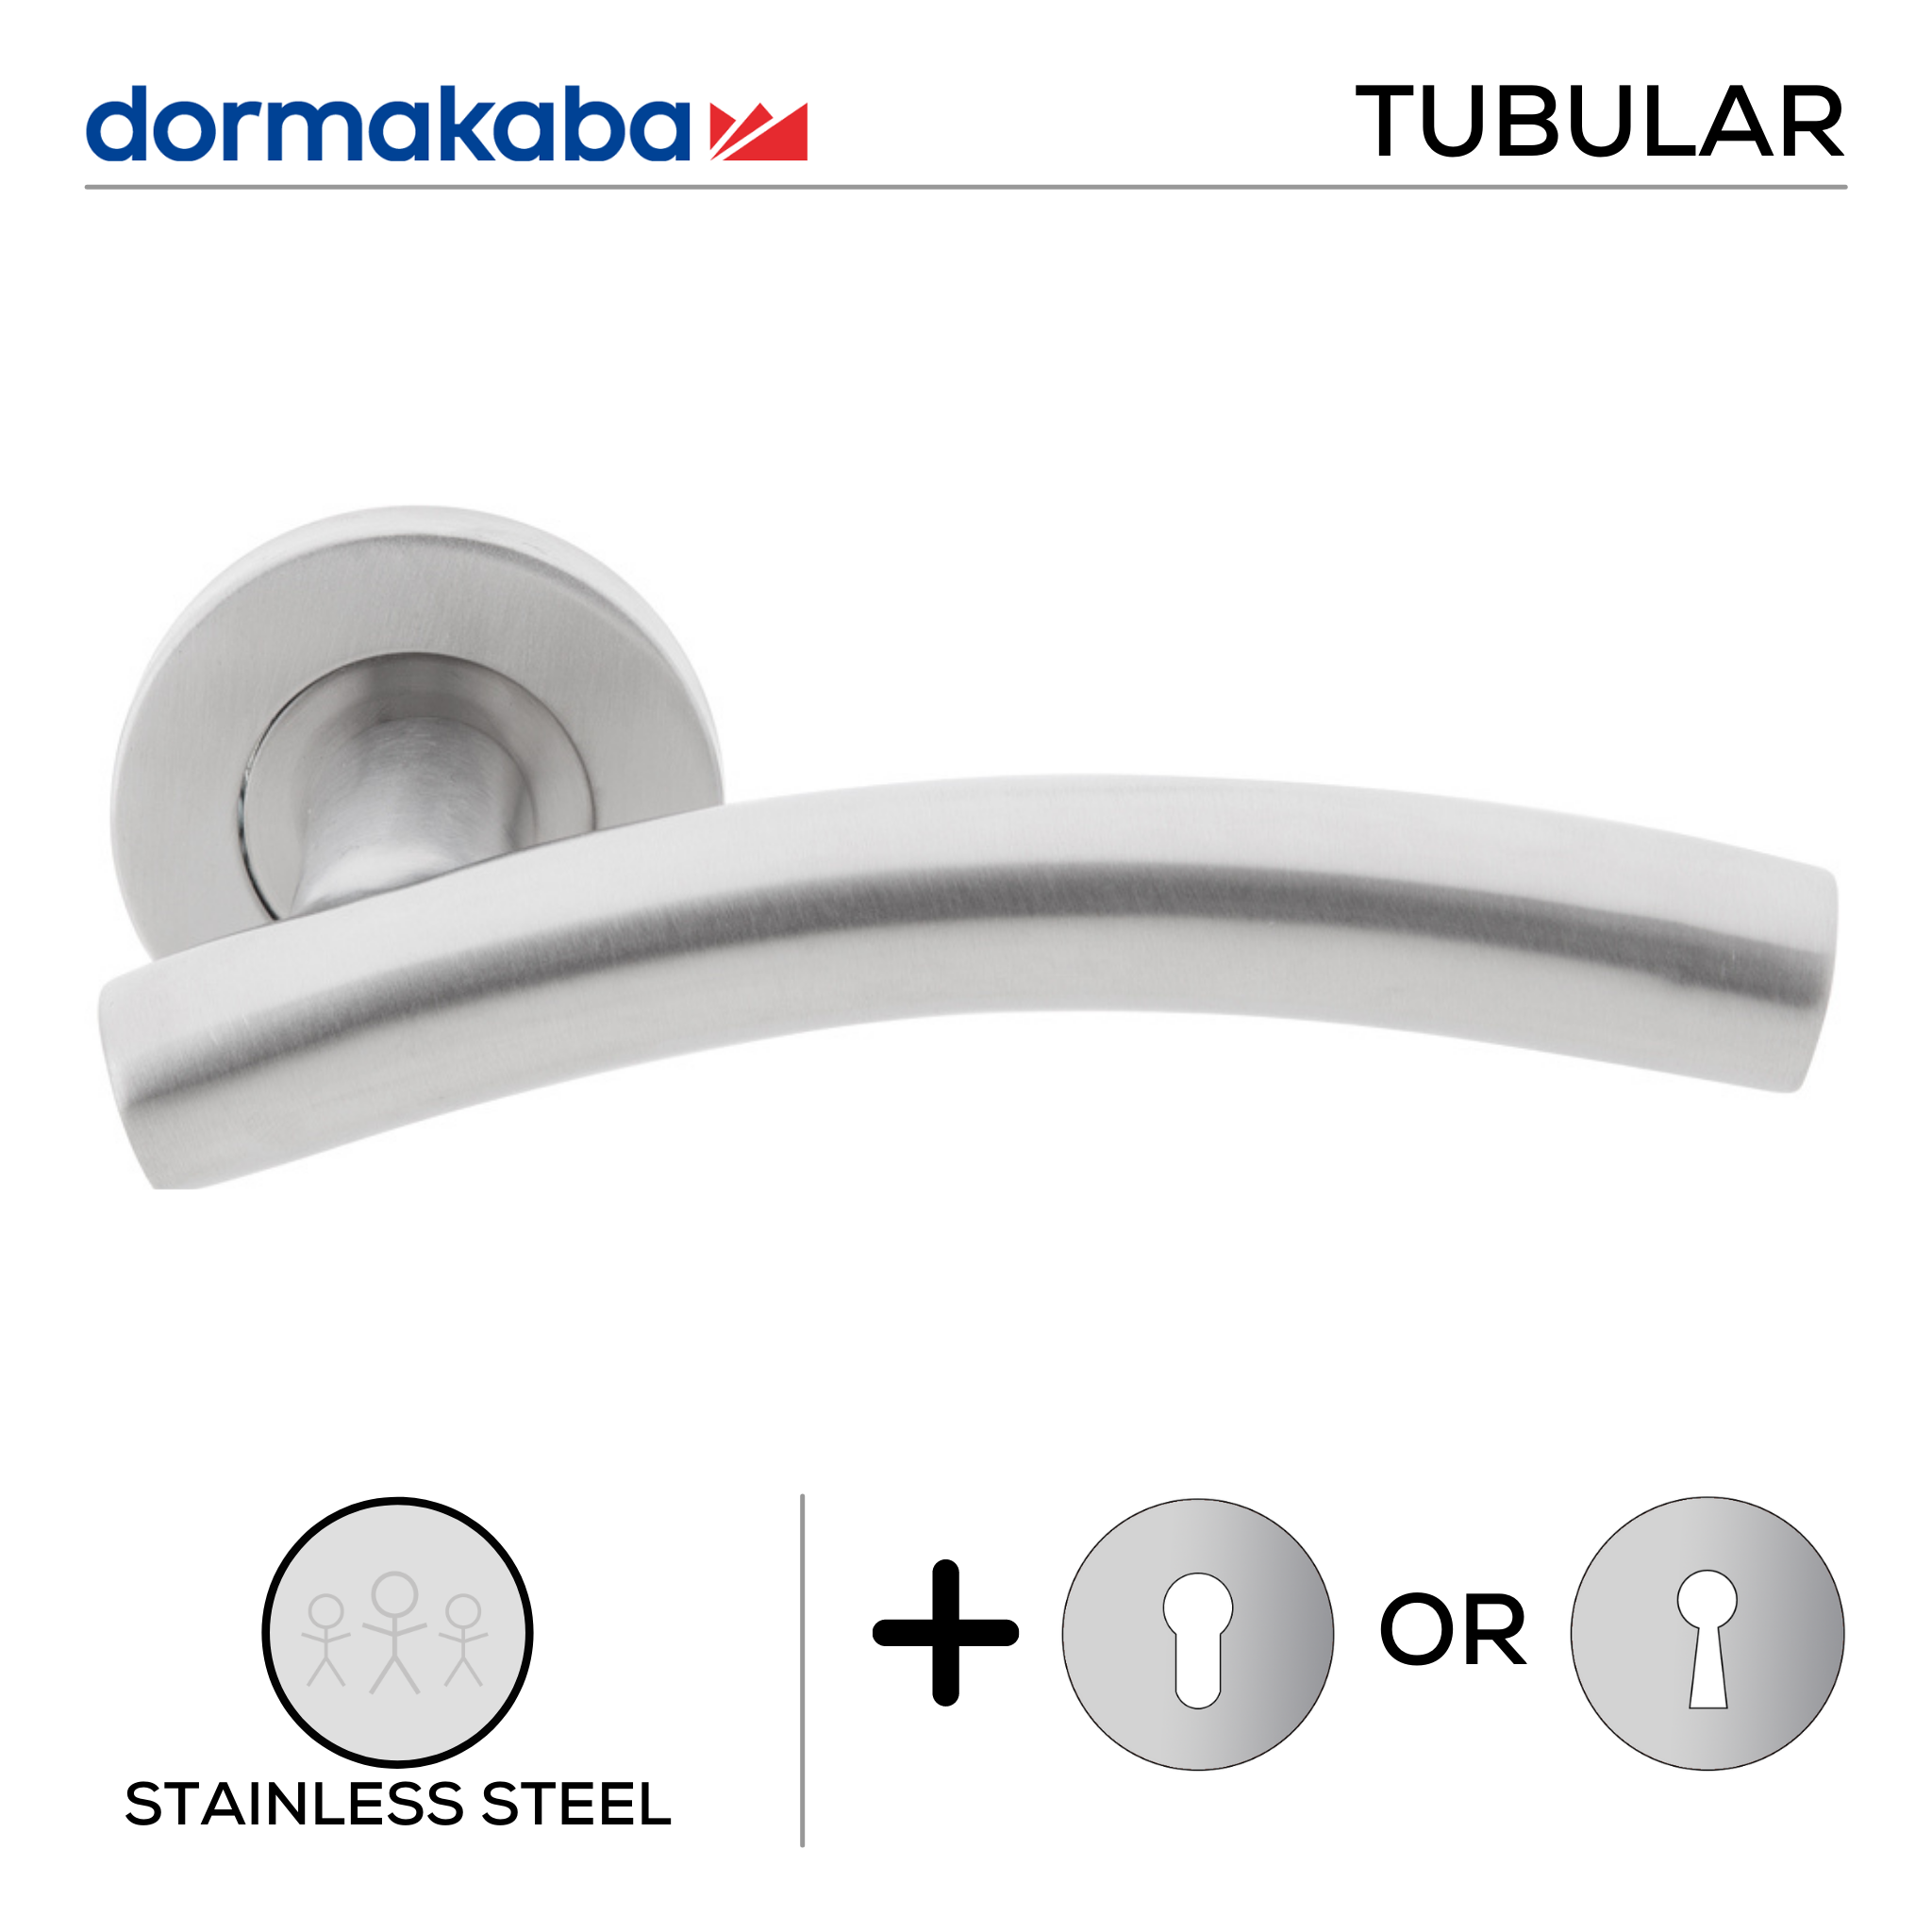 TH 121, Lever Handles, Tubular, On Round Rose, With Escutcheons, 137mm (l), Stainless Steel, DORMAKABA